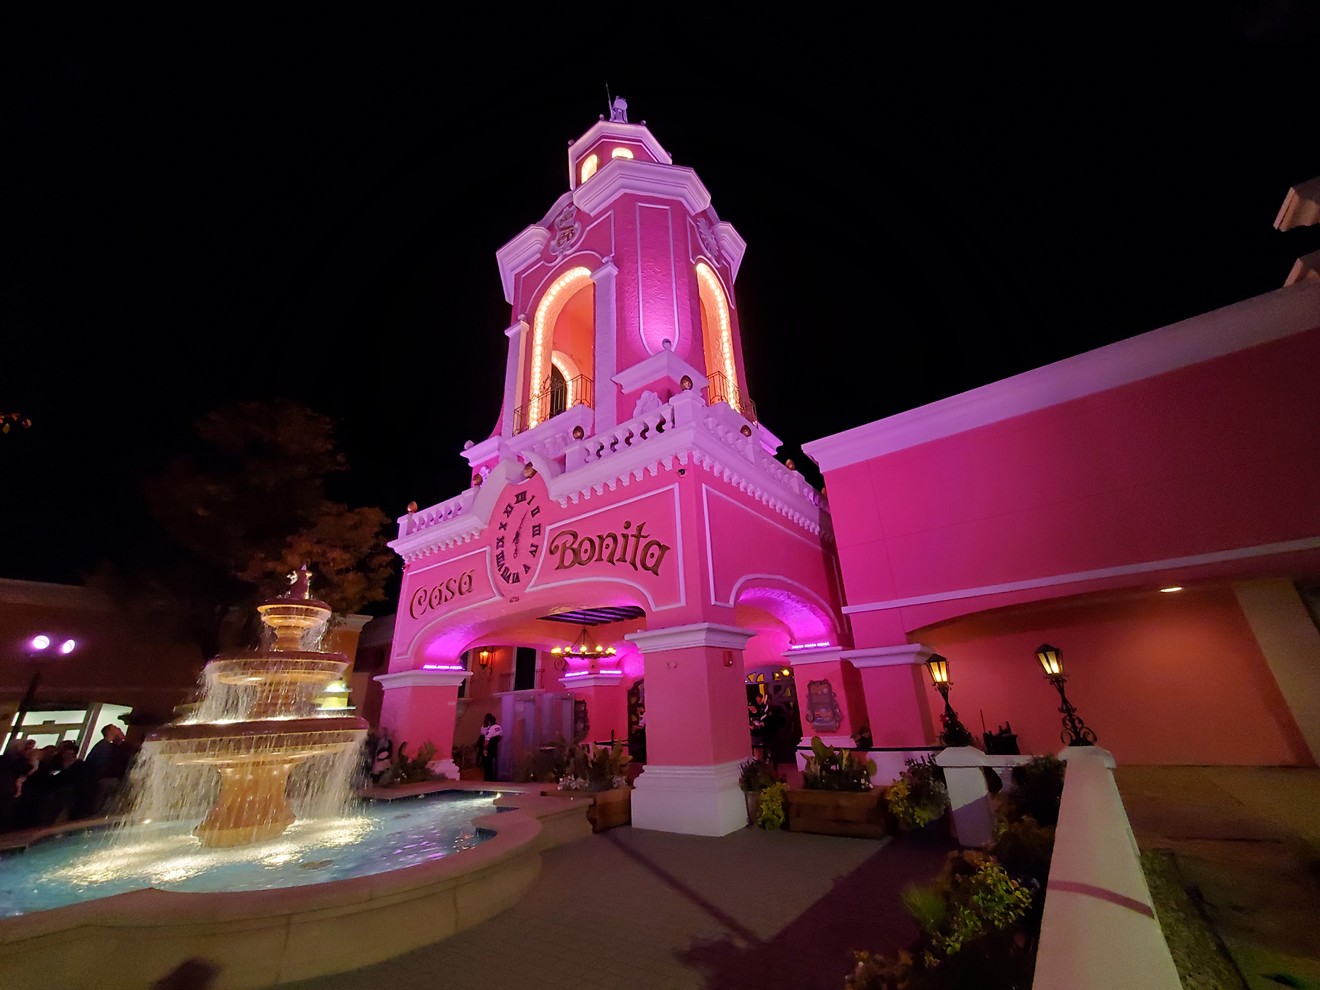 The pink palace is filled with fun surprises.